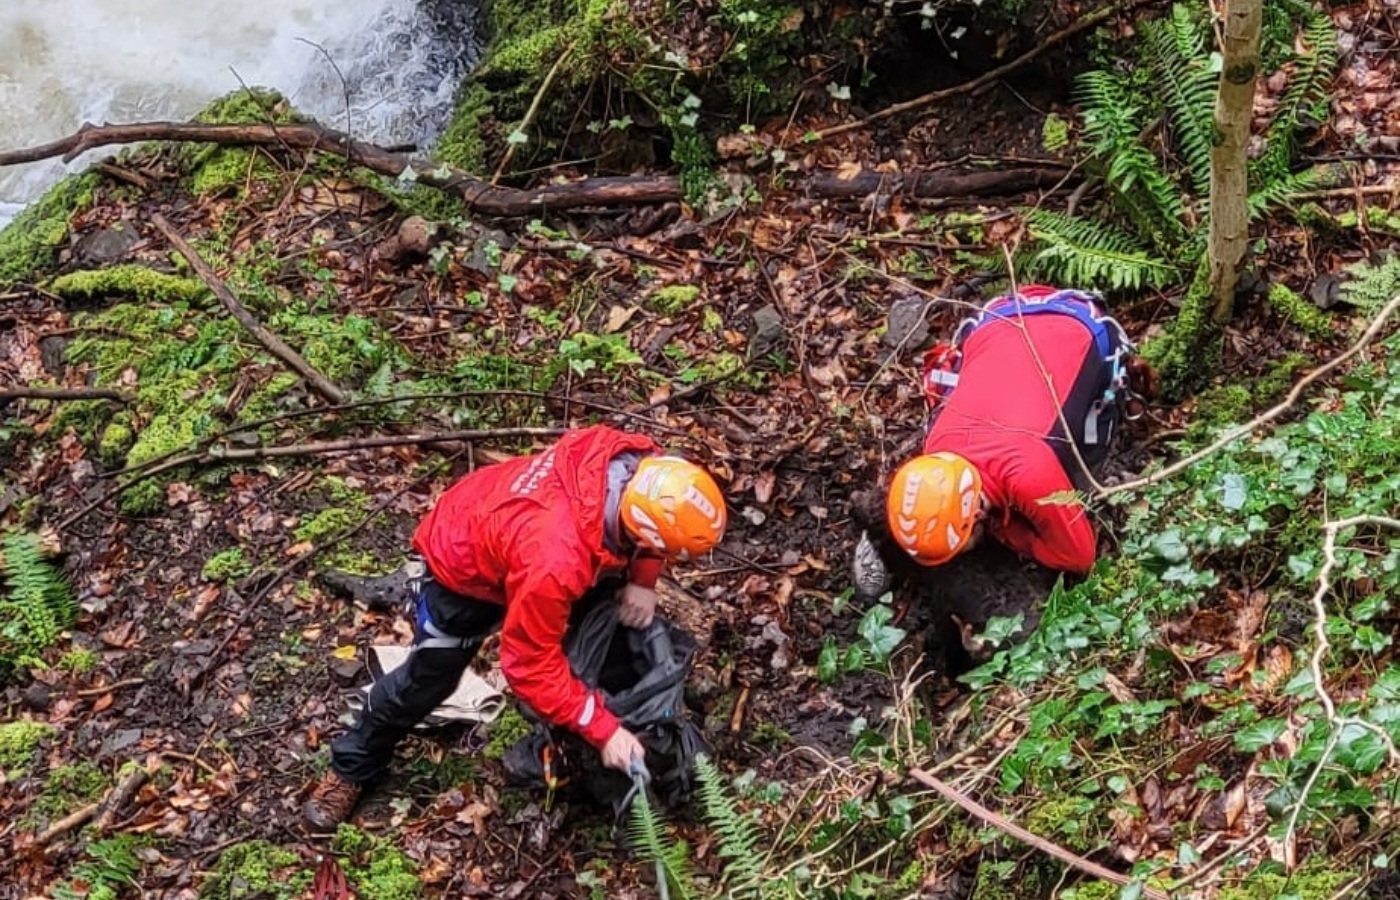 A team member abseiled into the gorge to secure Hamish and make him safe.